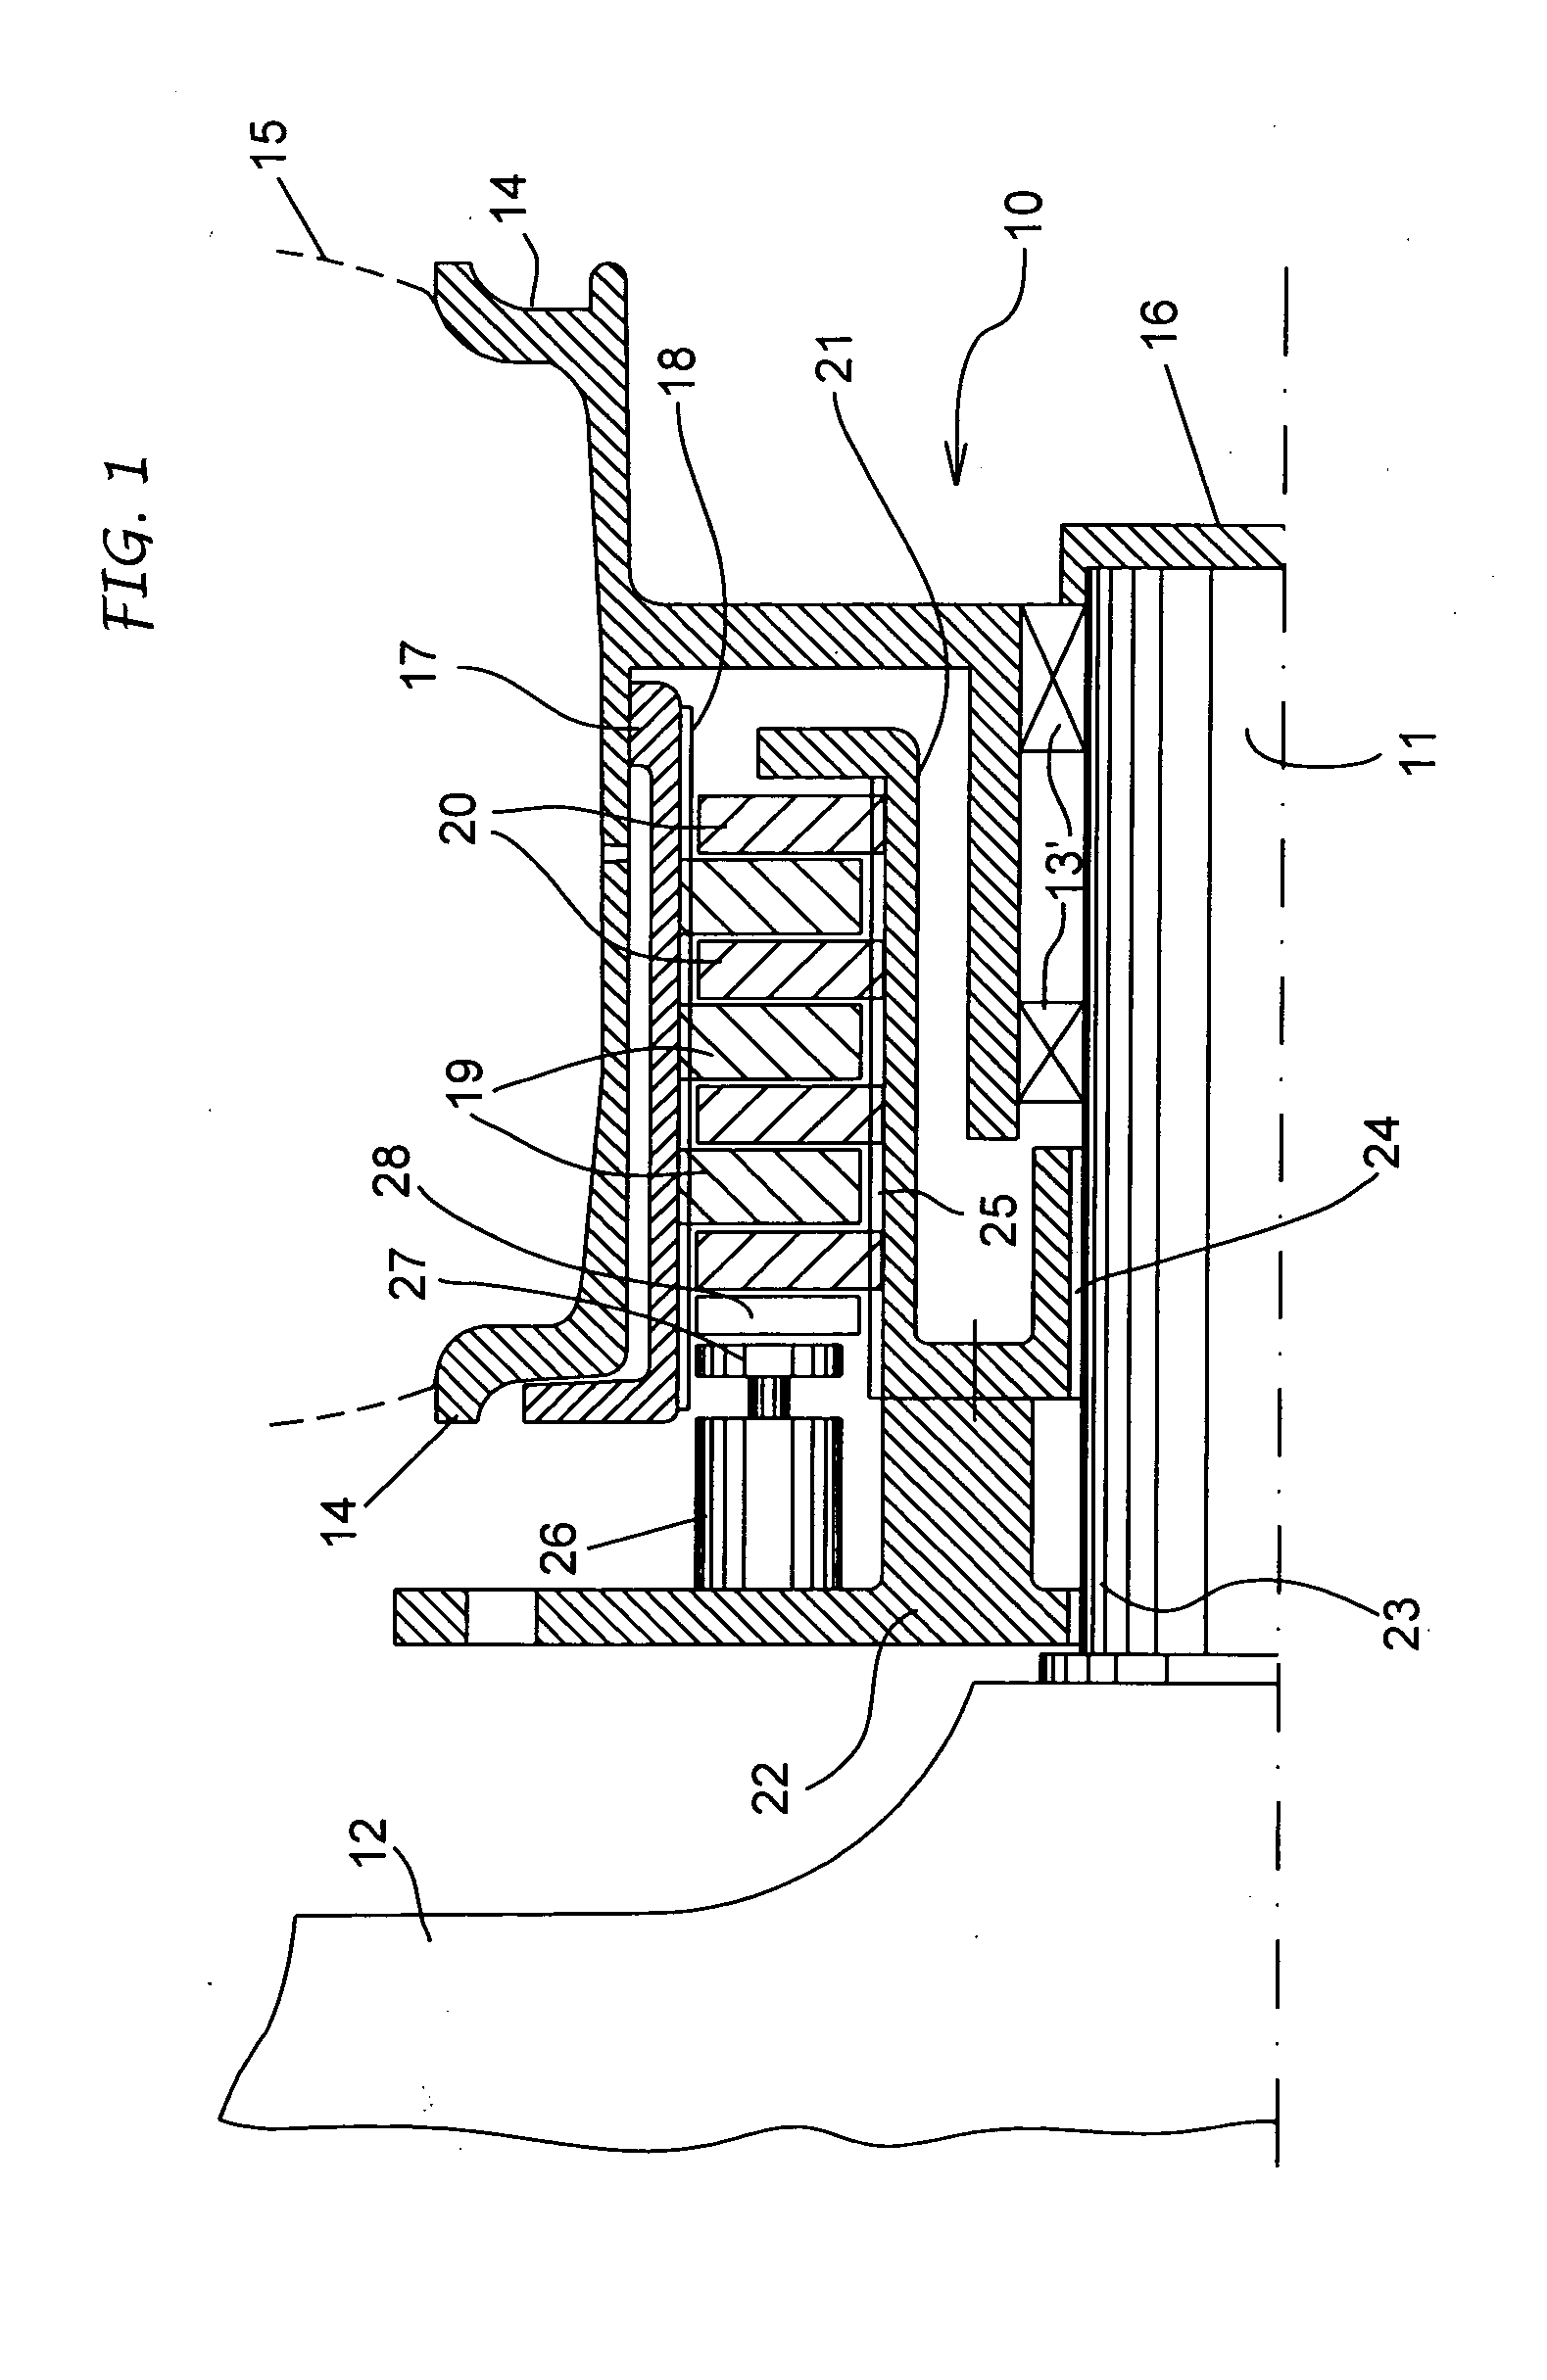 Device and method for a rotation of the wheels of the landing gear of aircraft